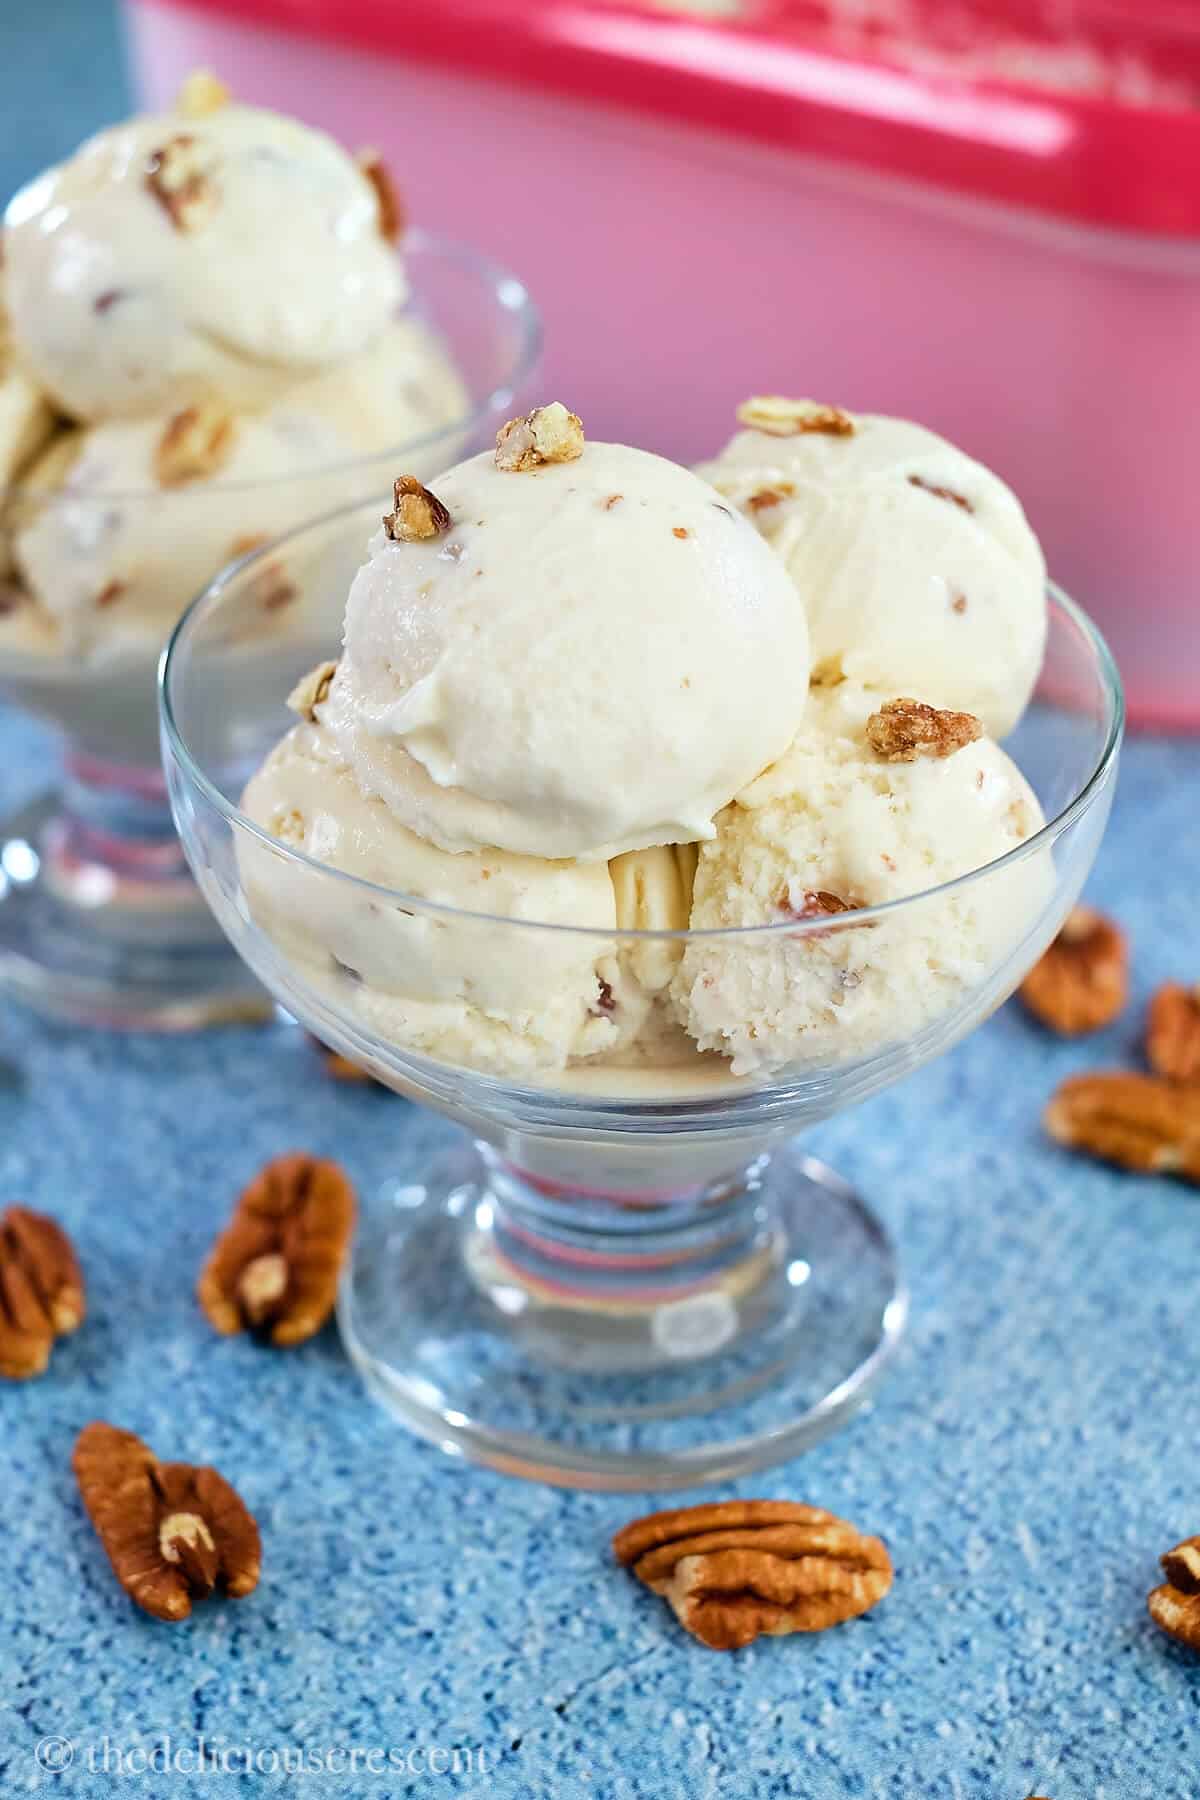 Maple ice cream served in two bowls.